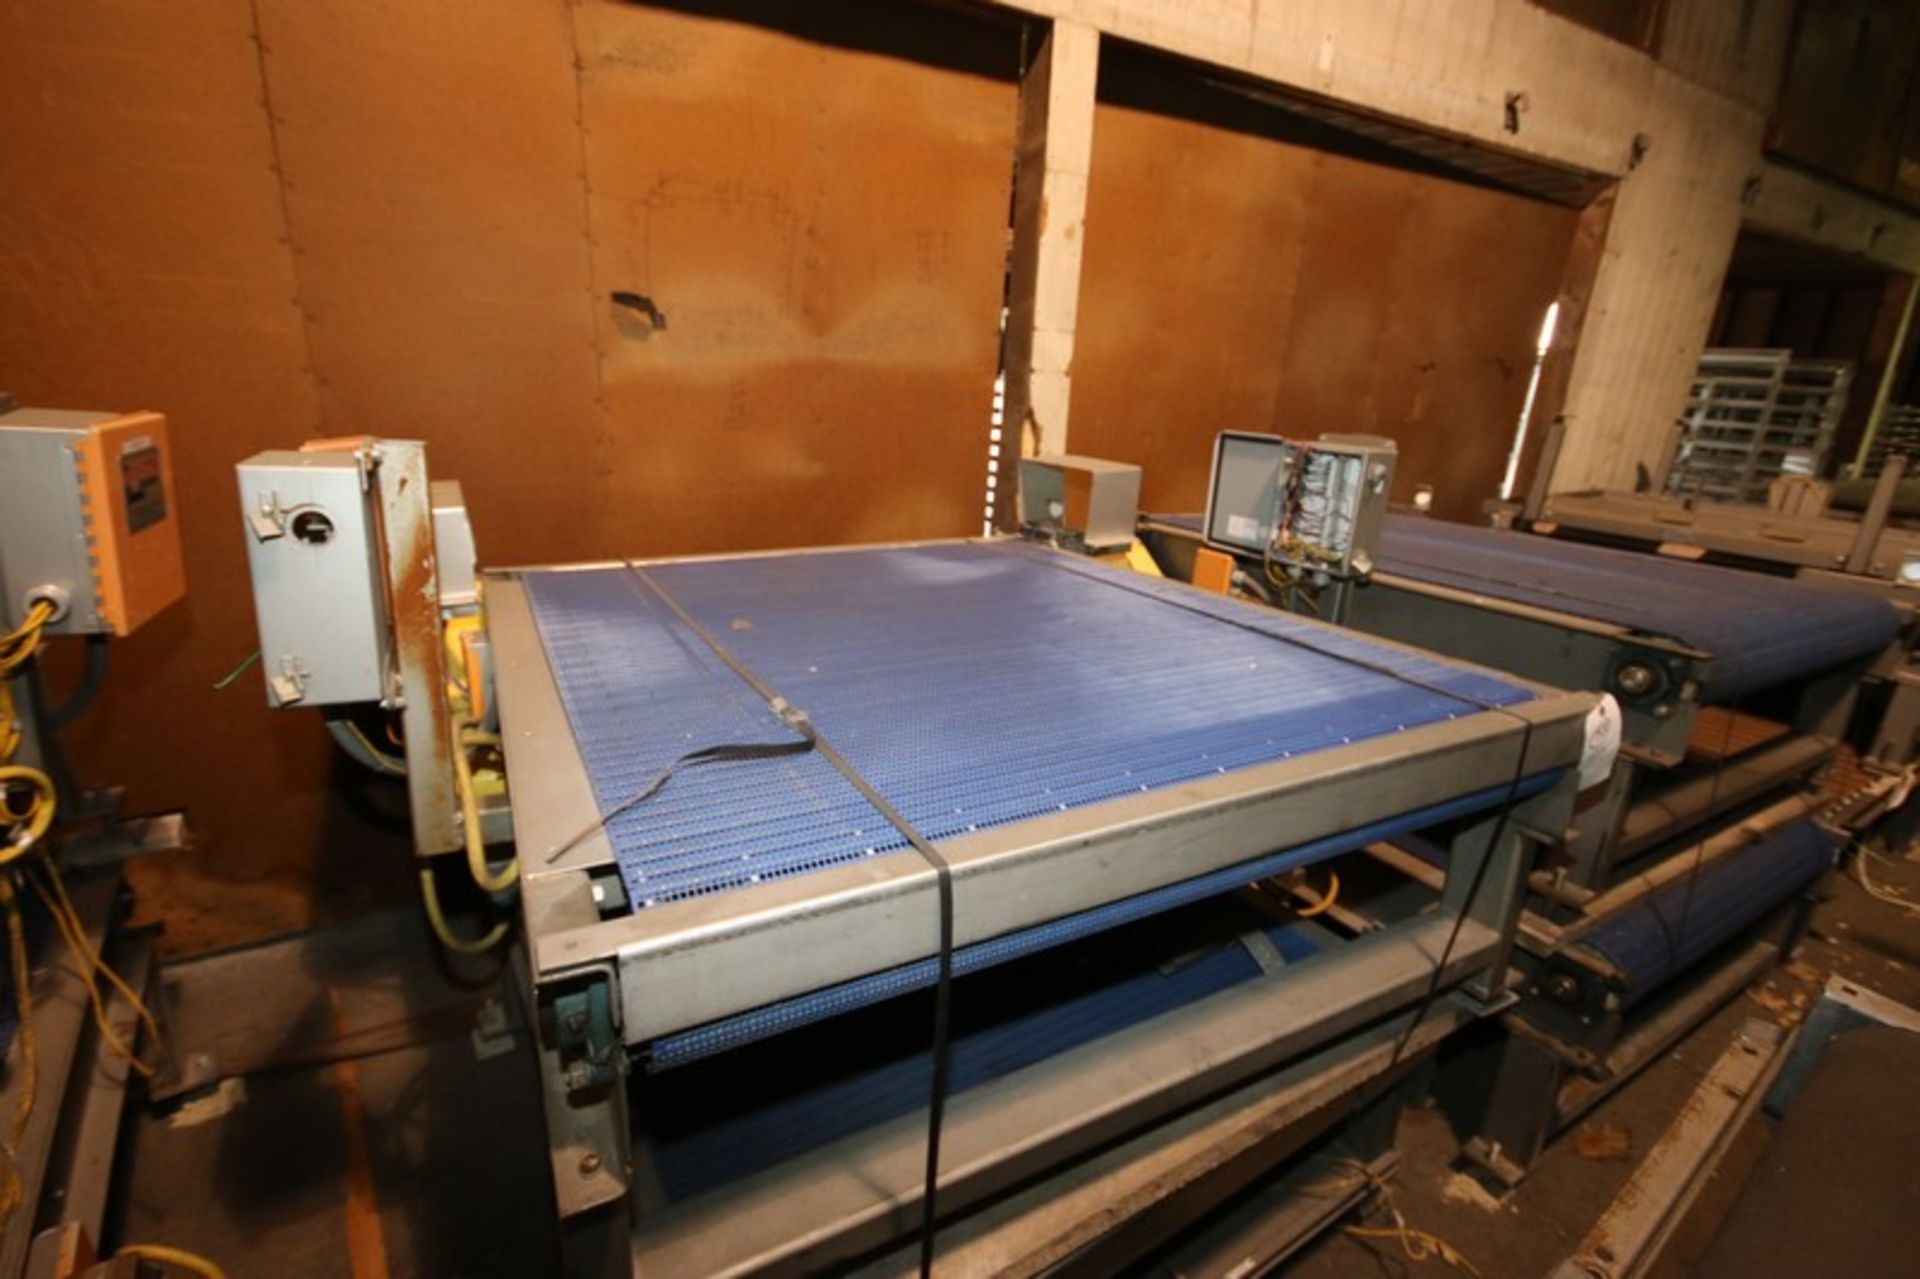 6-Sections of H&CS Conveyors, Overall Dims.: Aprox. 60" L x 64" W x 36" H, with Plastic Blue Belt, - Image 4 of 7